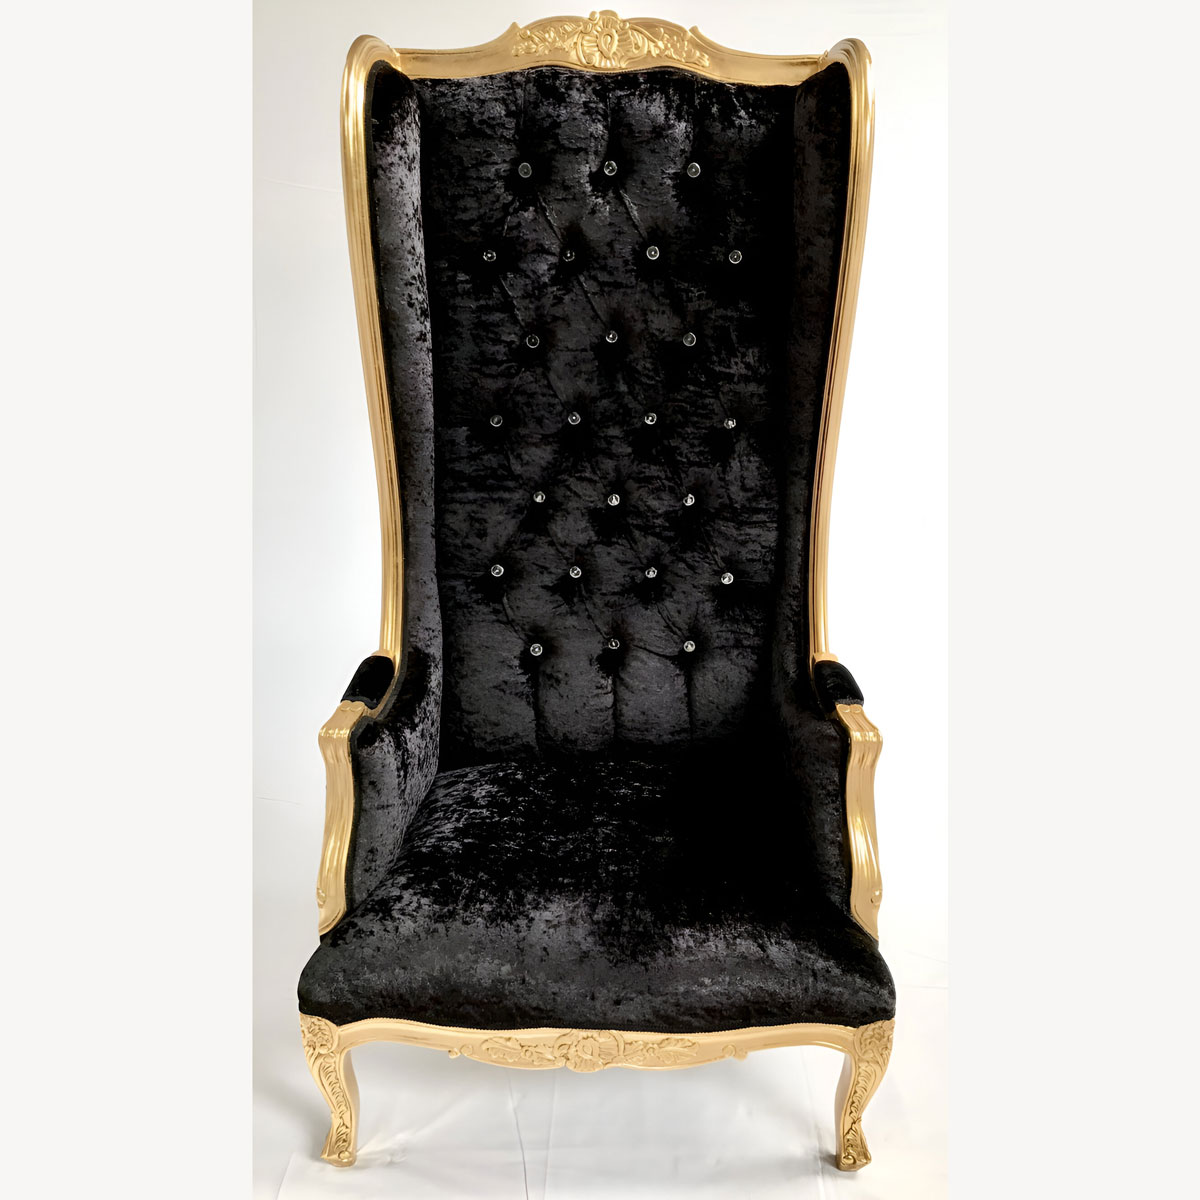 Gold Ornate High Back Porters Arm Chair In Black Crushed Velvet With Crystals 1 - Hampshire Barn Interiors - Gold Ornate High Back Porters Arm Chair In Black Crushed Velvet With Crystals -